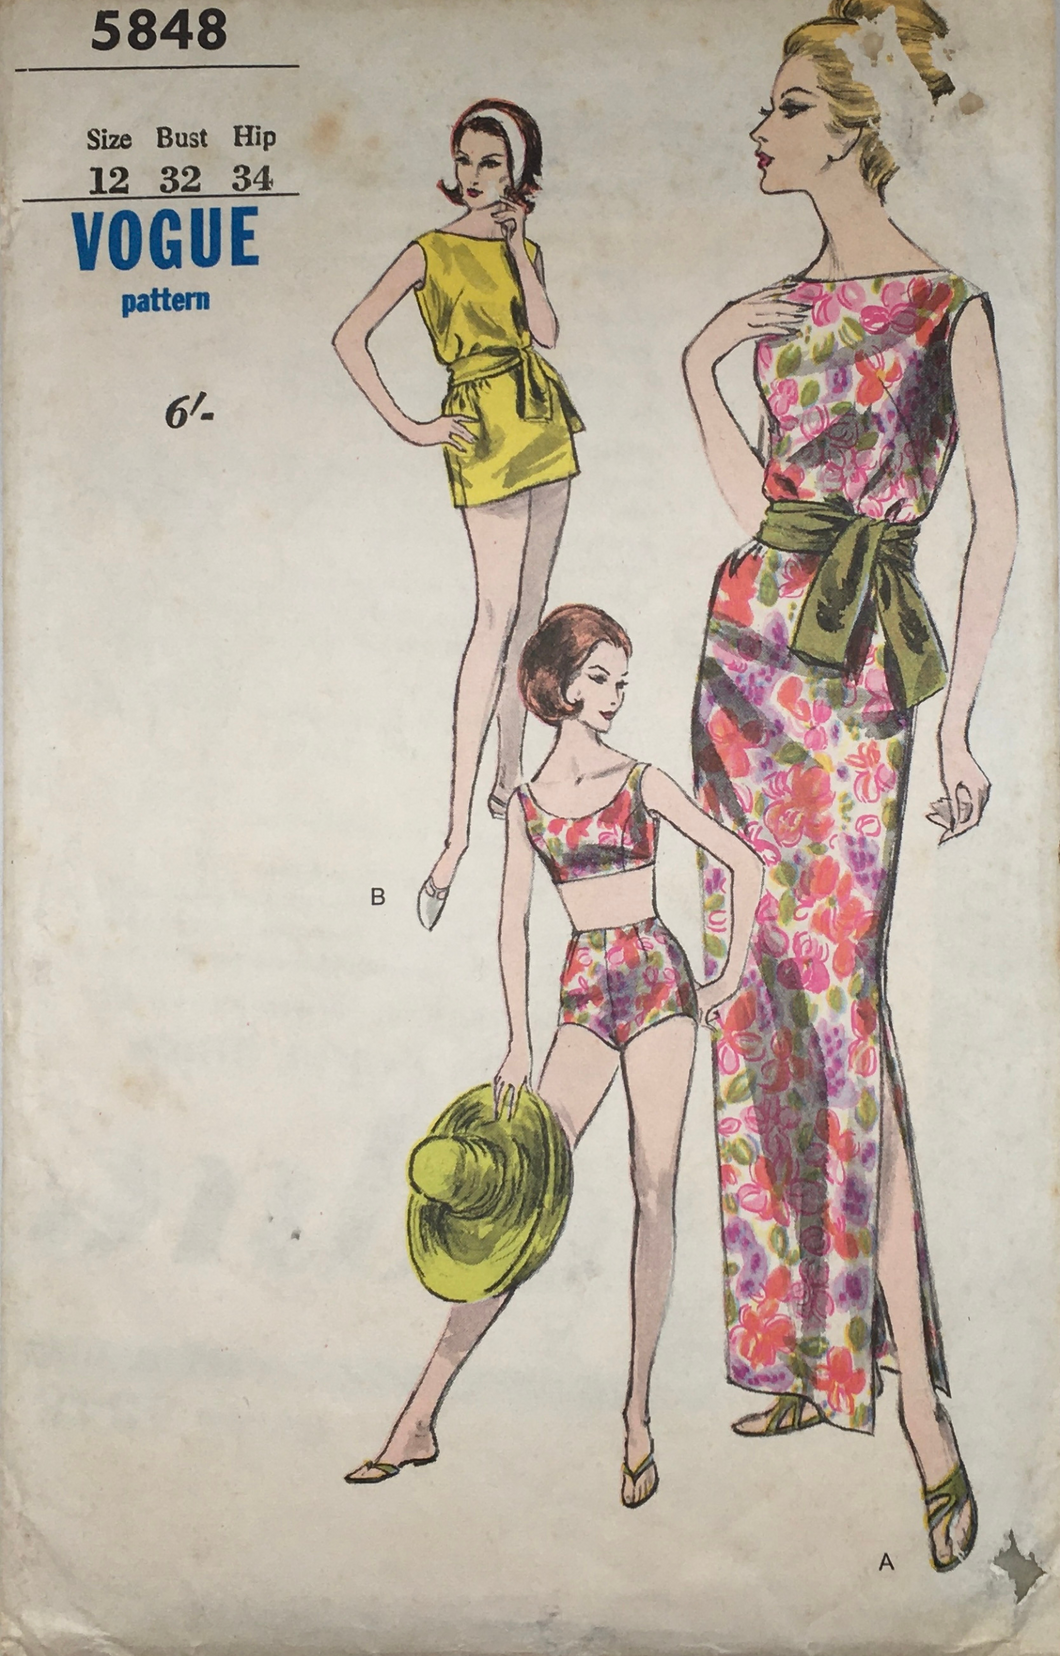 1960's Sewing Pattern: Vogue 5848